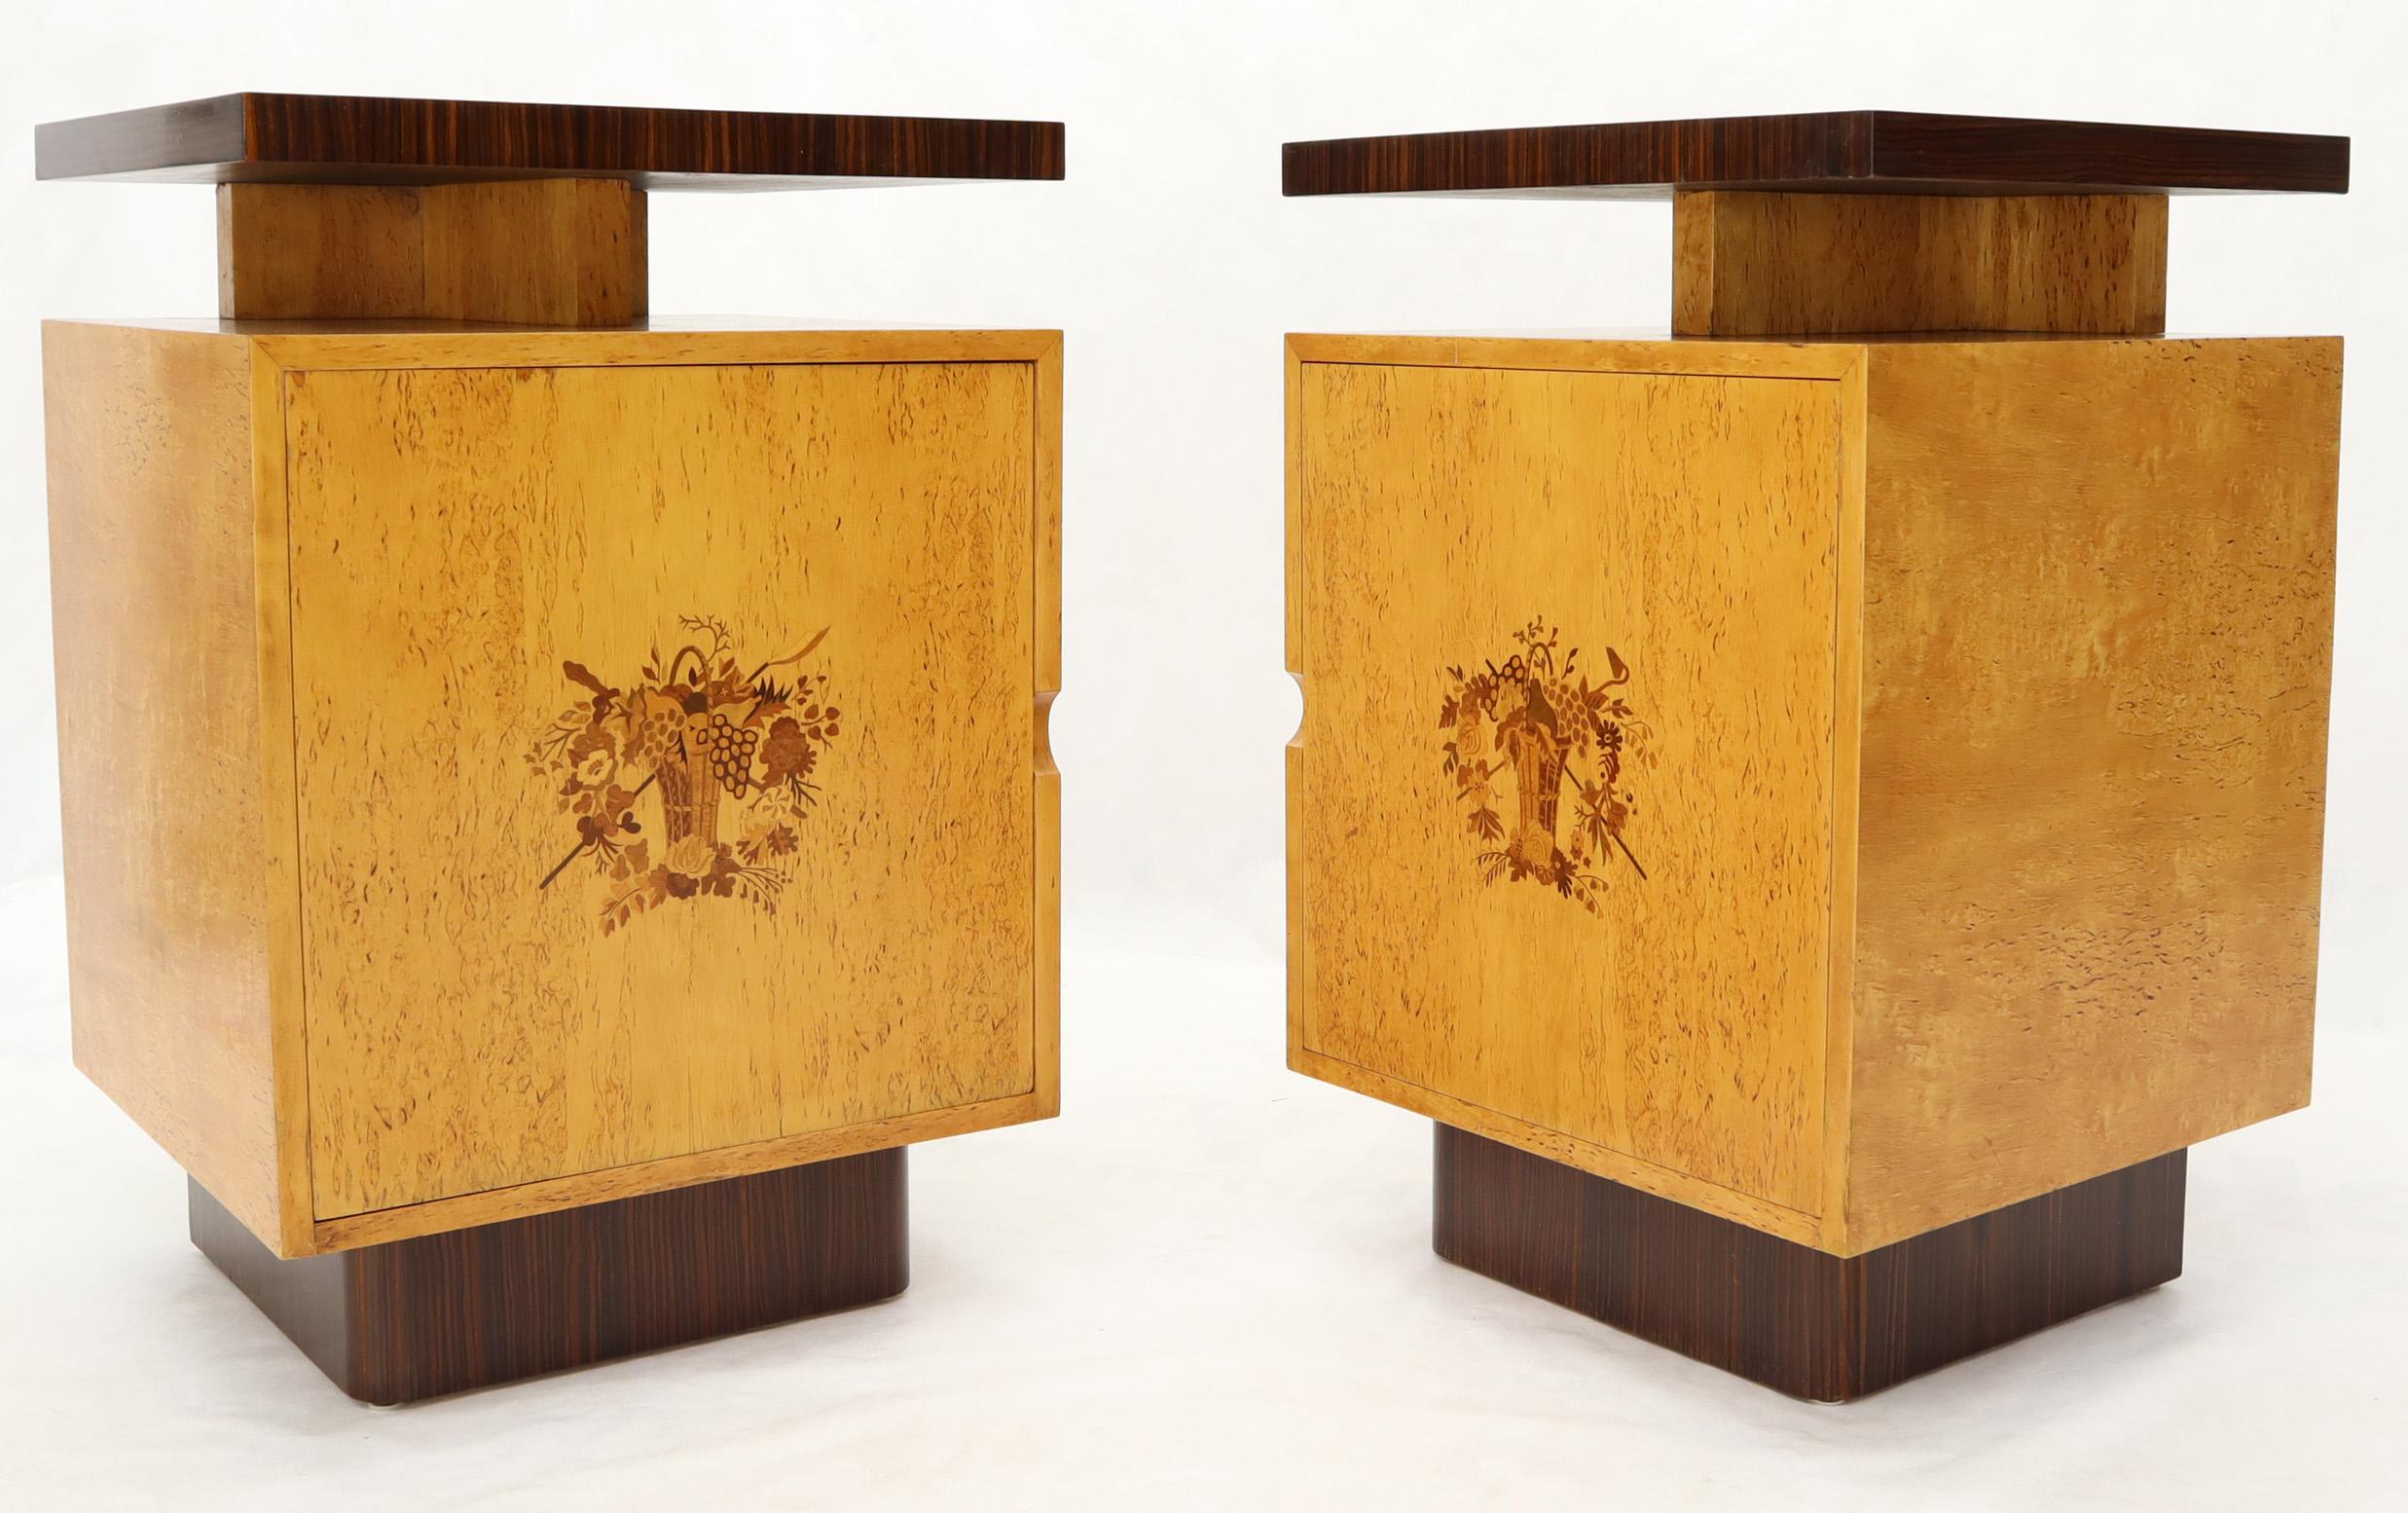 Pair of oversize floating rosewood top large compartment cube shape end tables storage cabinets. Curved rosewood bases. Floral theme doors inlay. Designed by Andrew Szoeke.